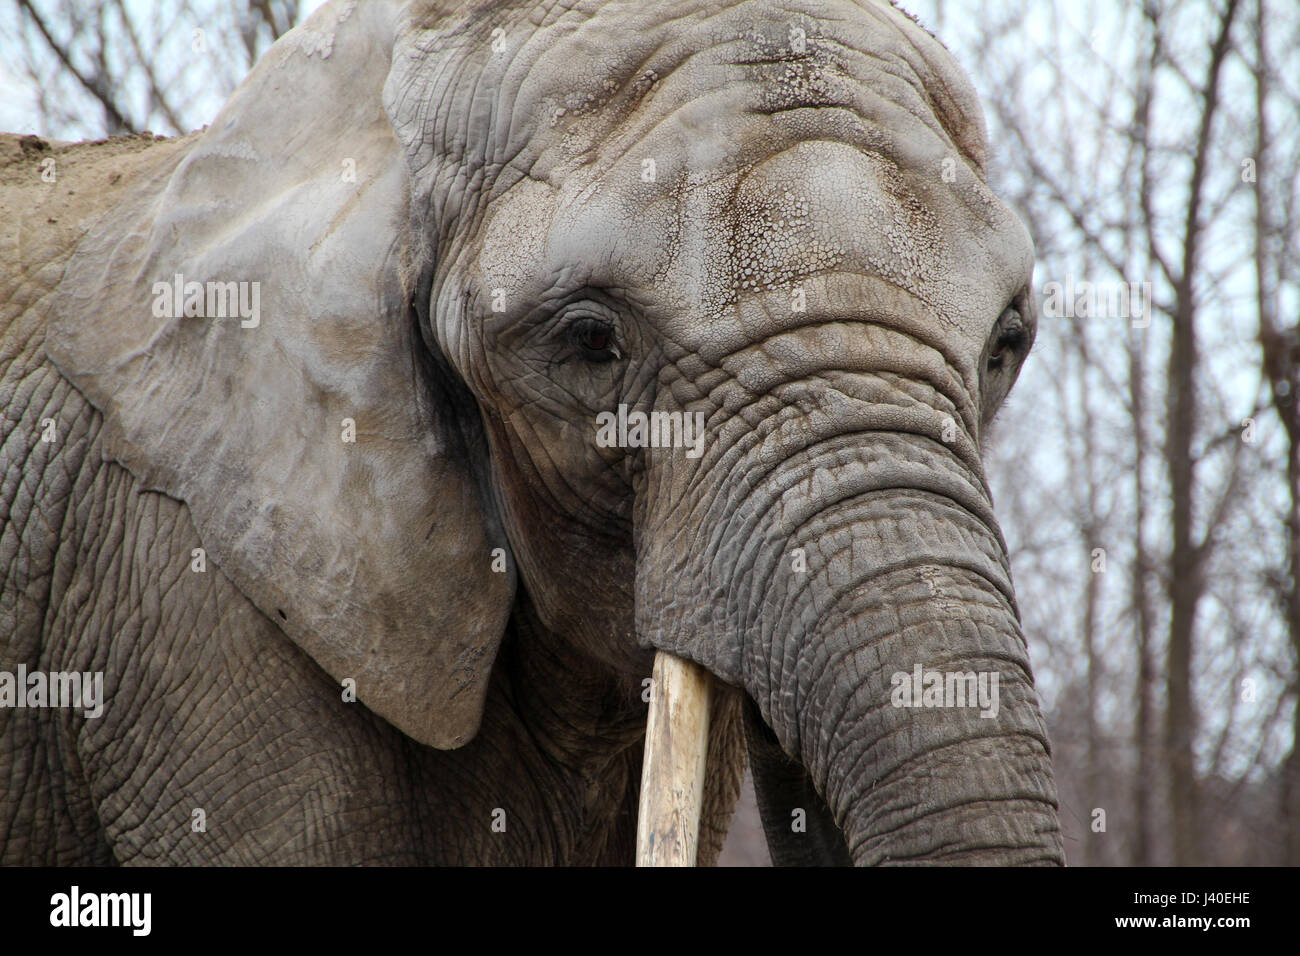 Portrait of an elephant in captivity at a zoo. Stock Photo